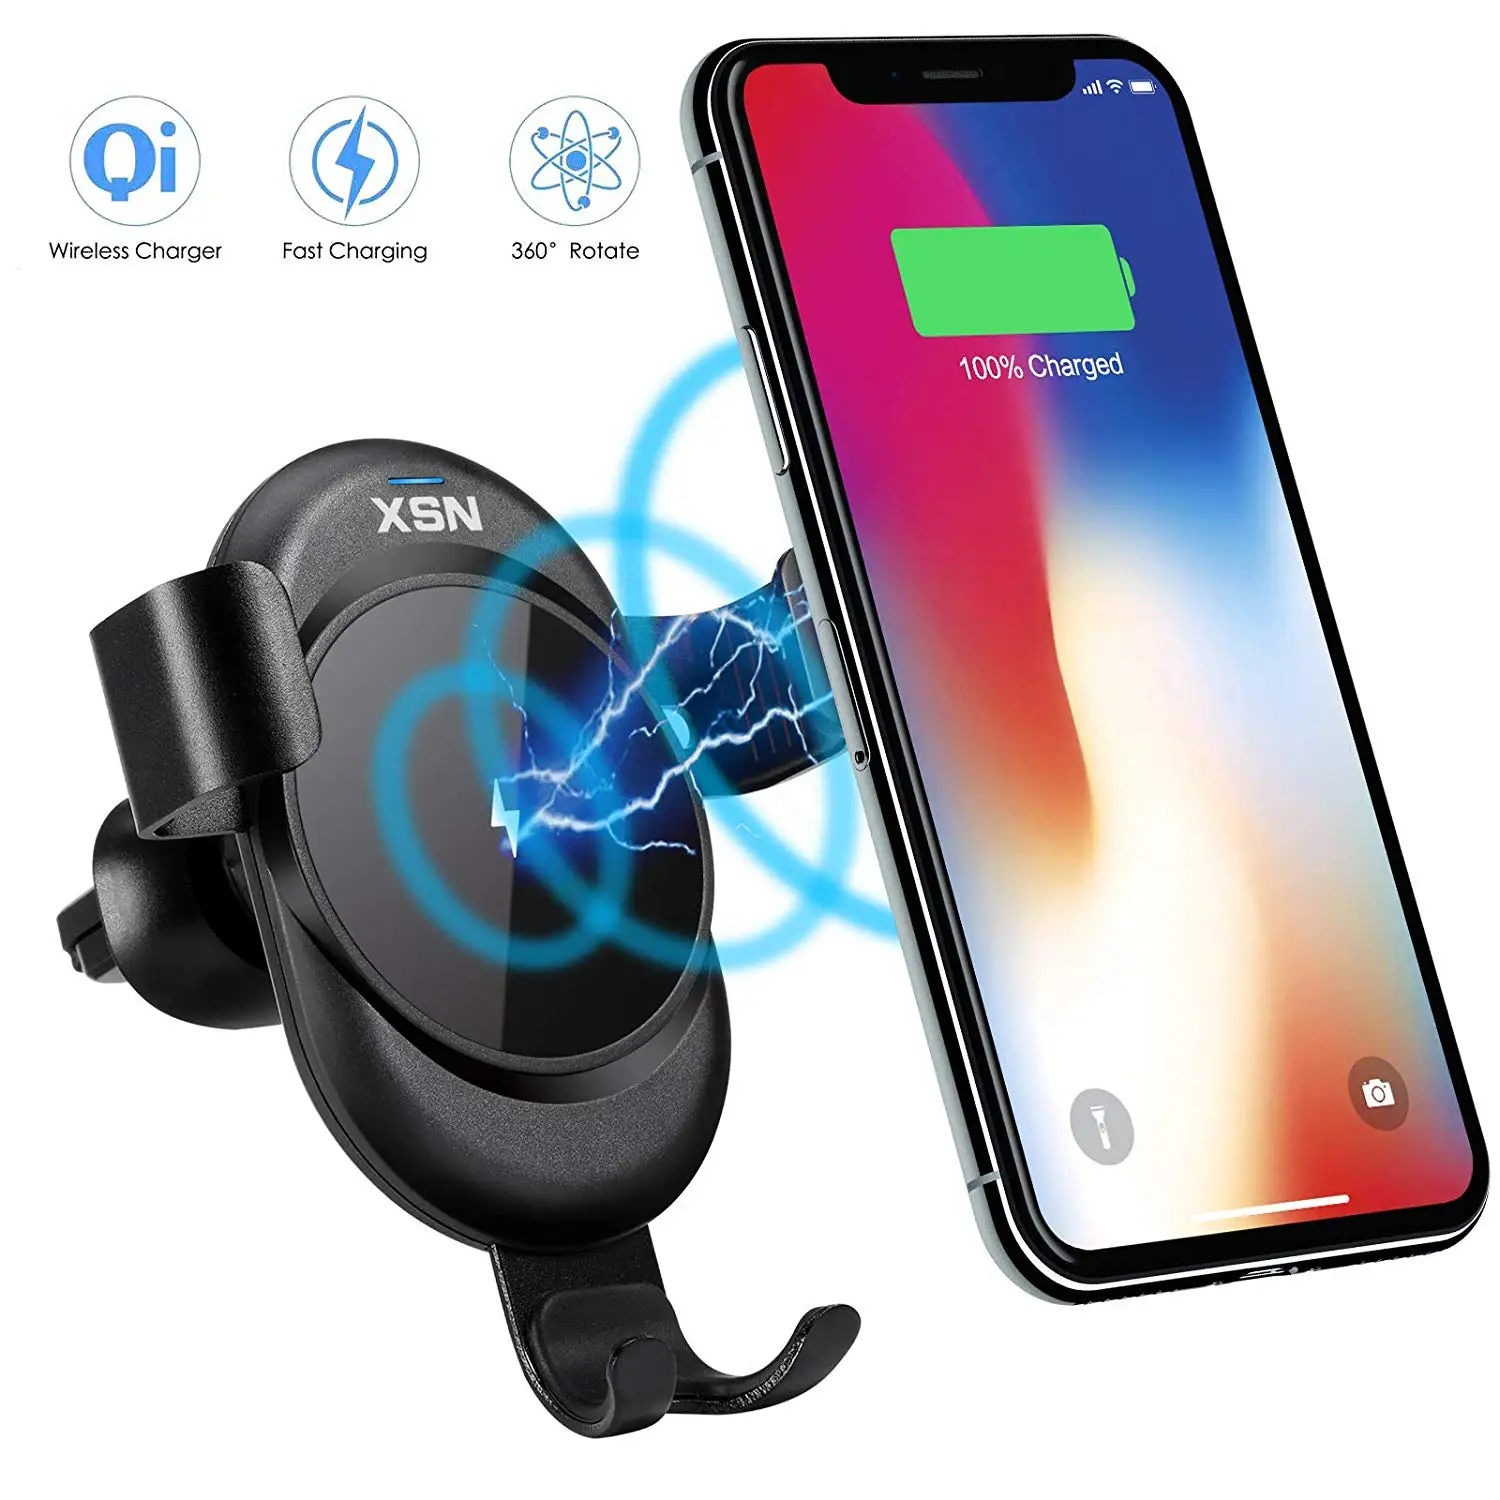 Wireless Car Charger Mount Vent Holder Charge 10W Compatible for Samsung Galaxy S9//S8//S7 Edge//Note 8 10W Fast Wireless Car Charger Standard Charge for iPhone X//8 Plus//8 and All Qi-Enabled Phone